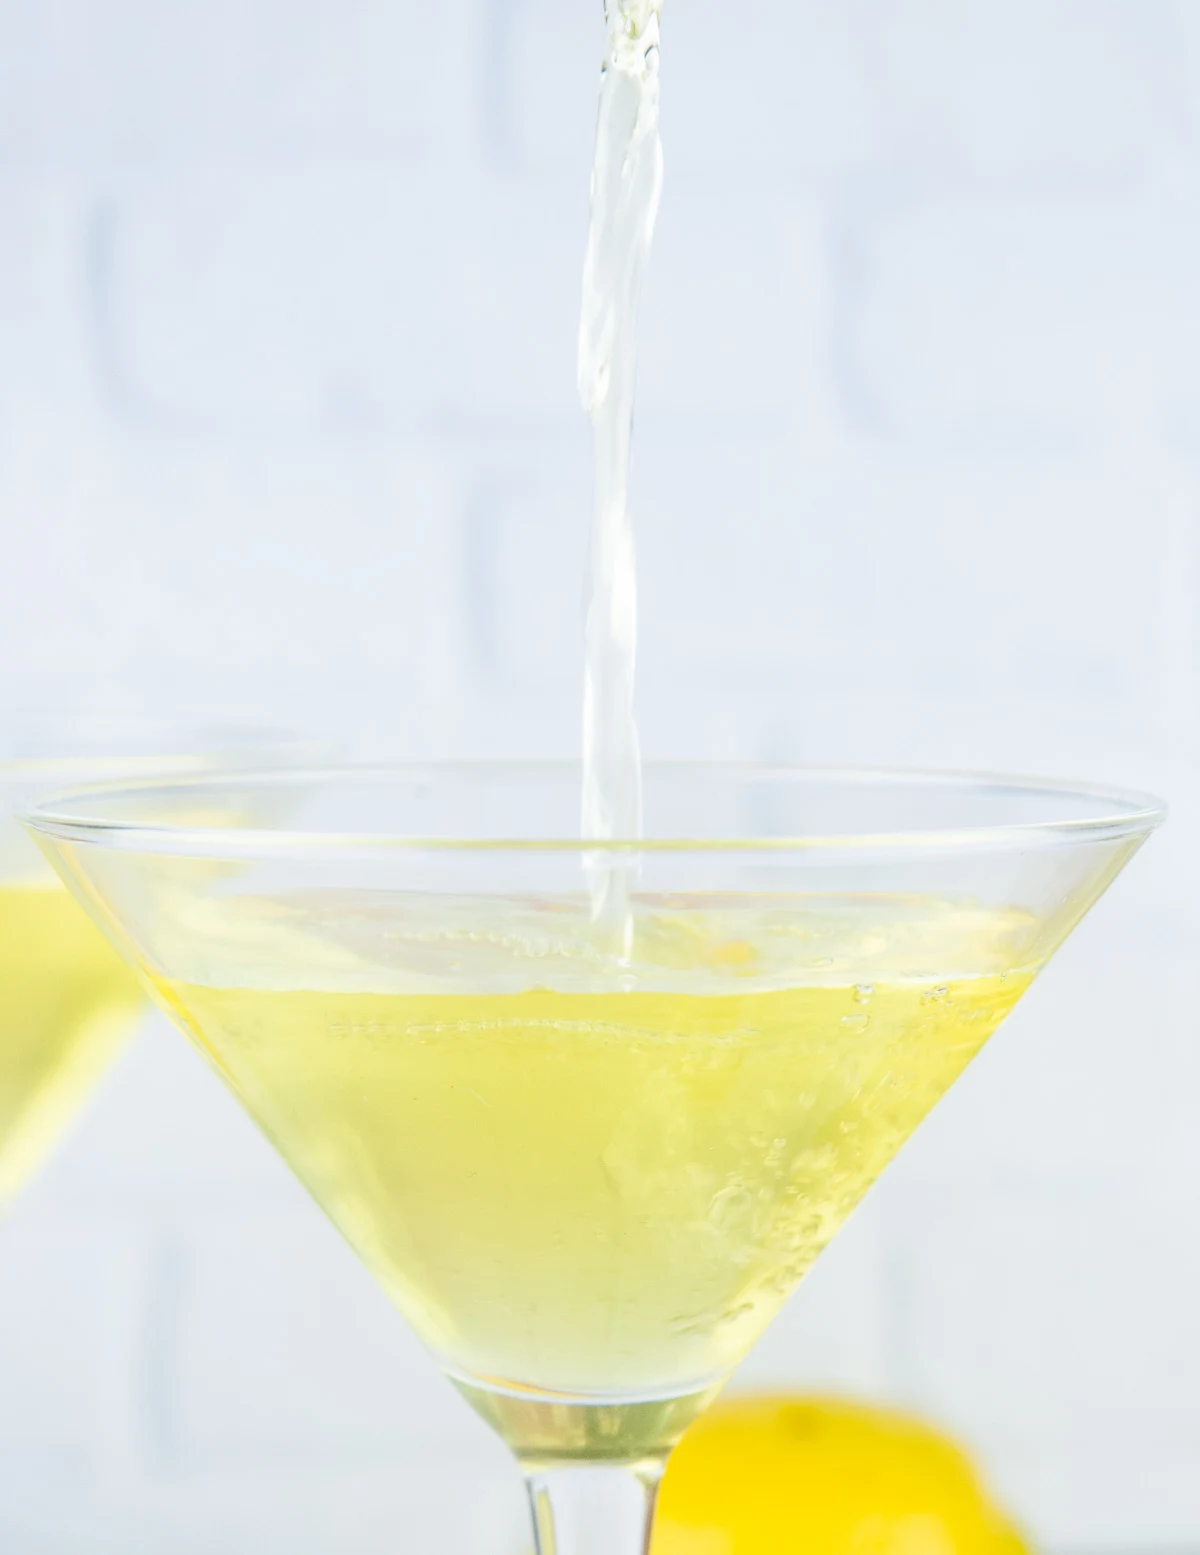 Learn how to make homemade limoncello with this easy recipe. A couple of simple ingredients, an easy prep, and you'll have an Italian drink ready to transport you to the Almafi coast.